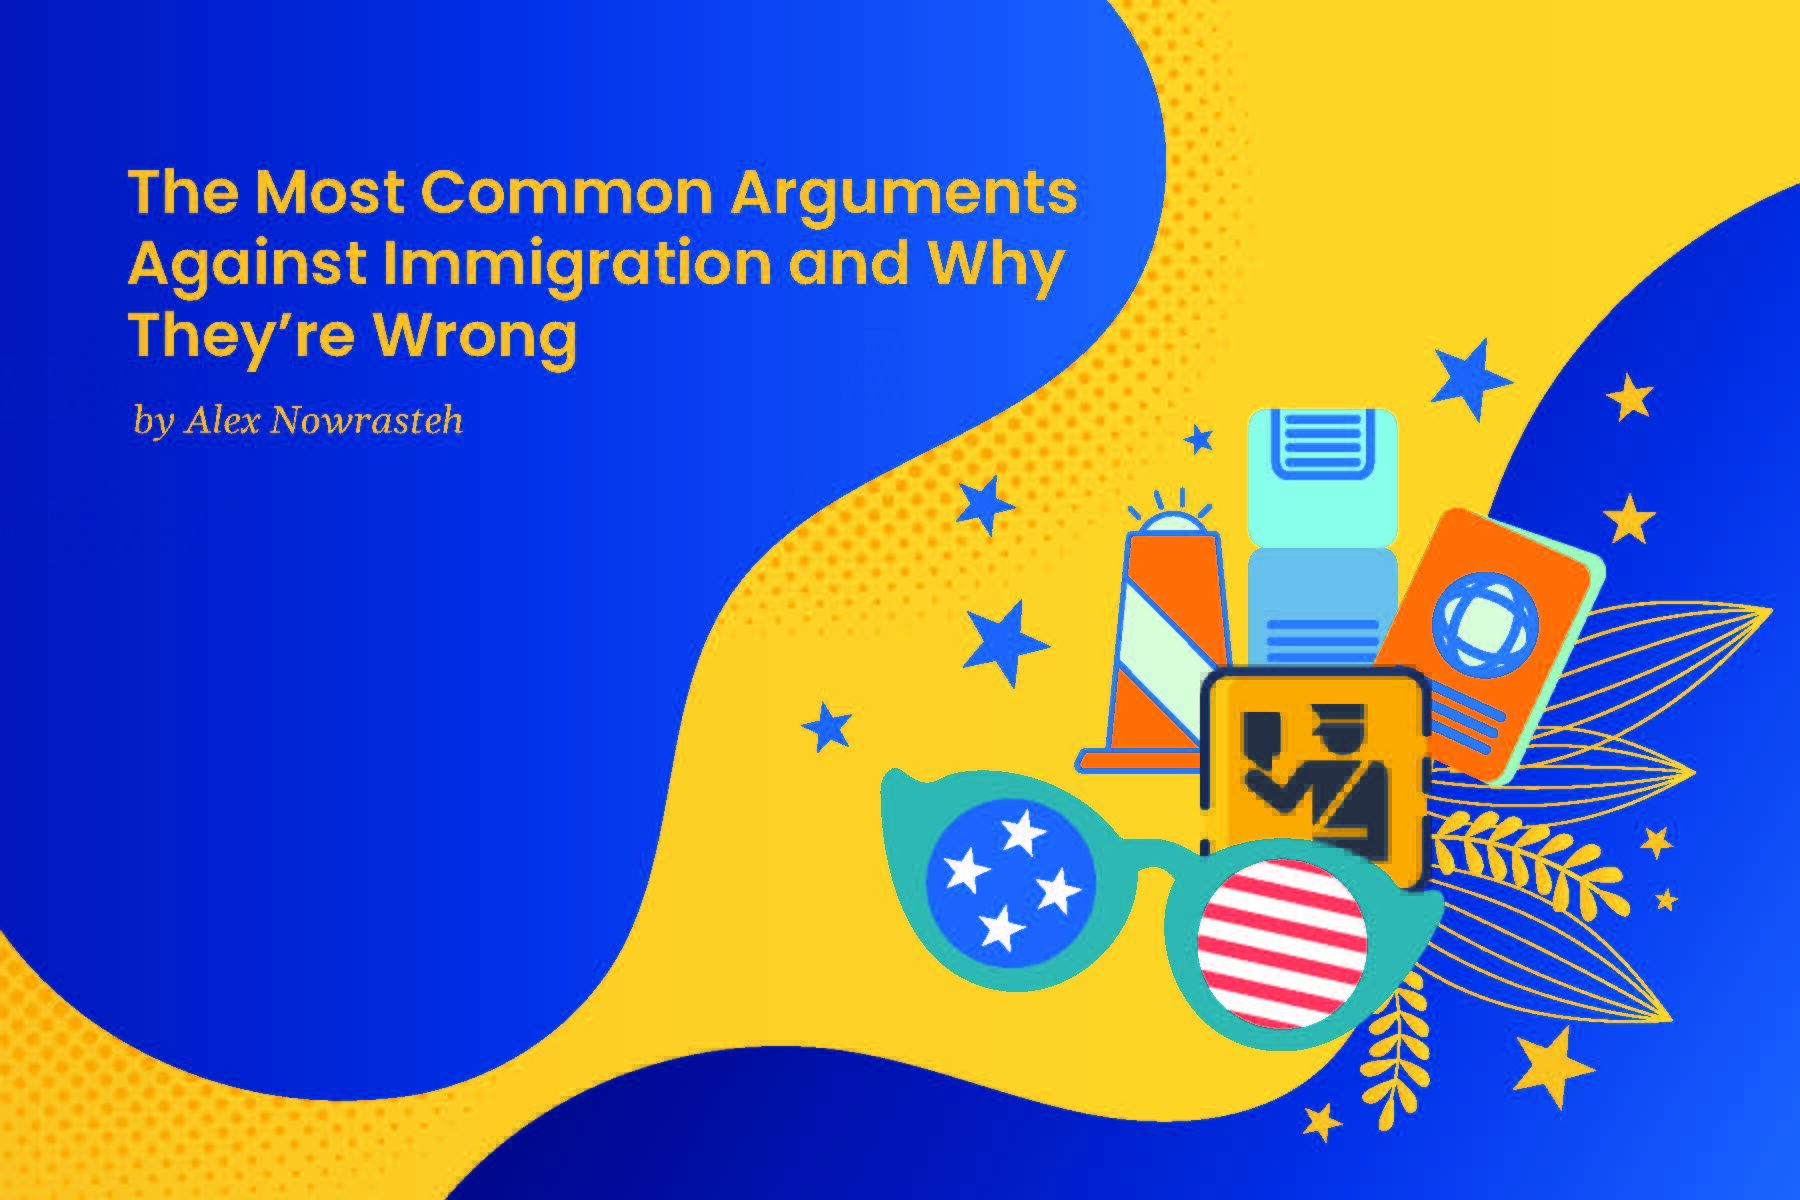 The Most Common Arguments Against Immigration and Why They Are Wrong